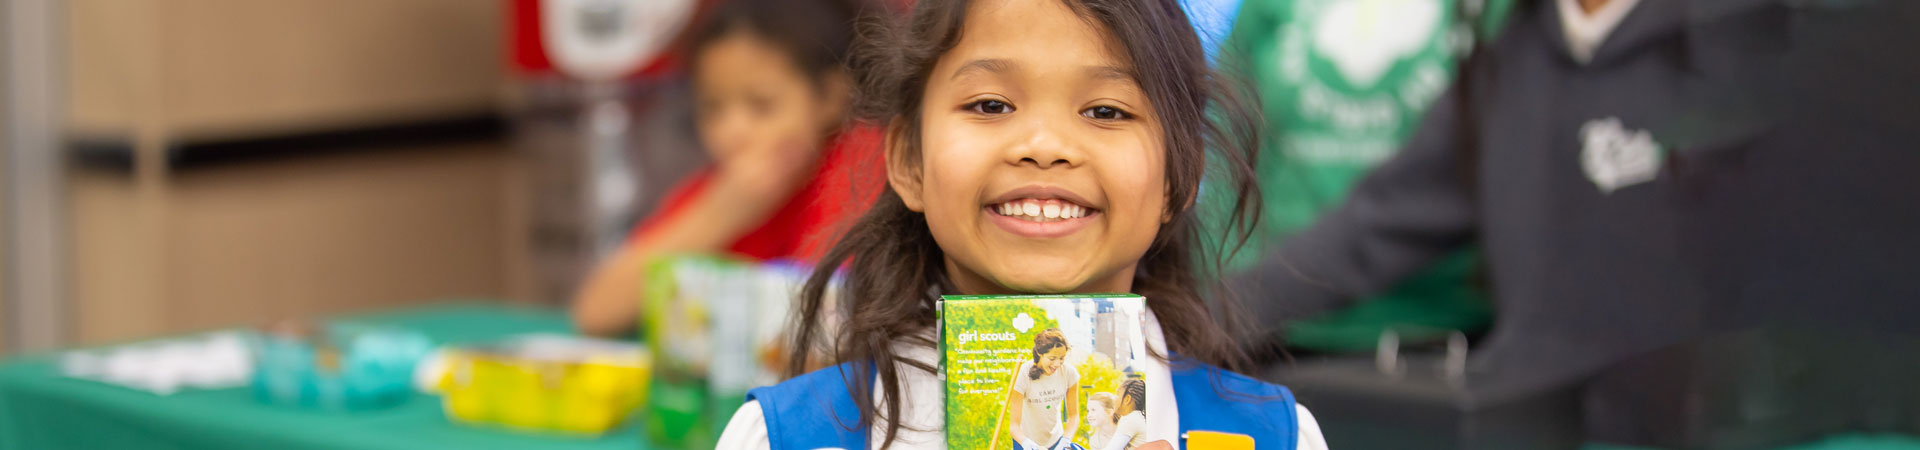  Daisy Girl Scout holding up a box of cookies and smiling 